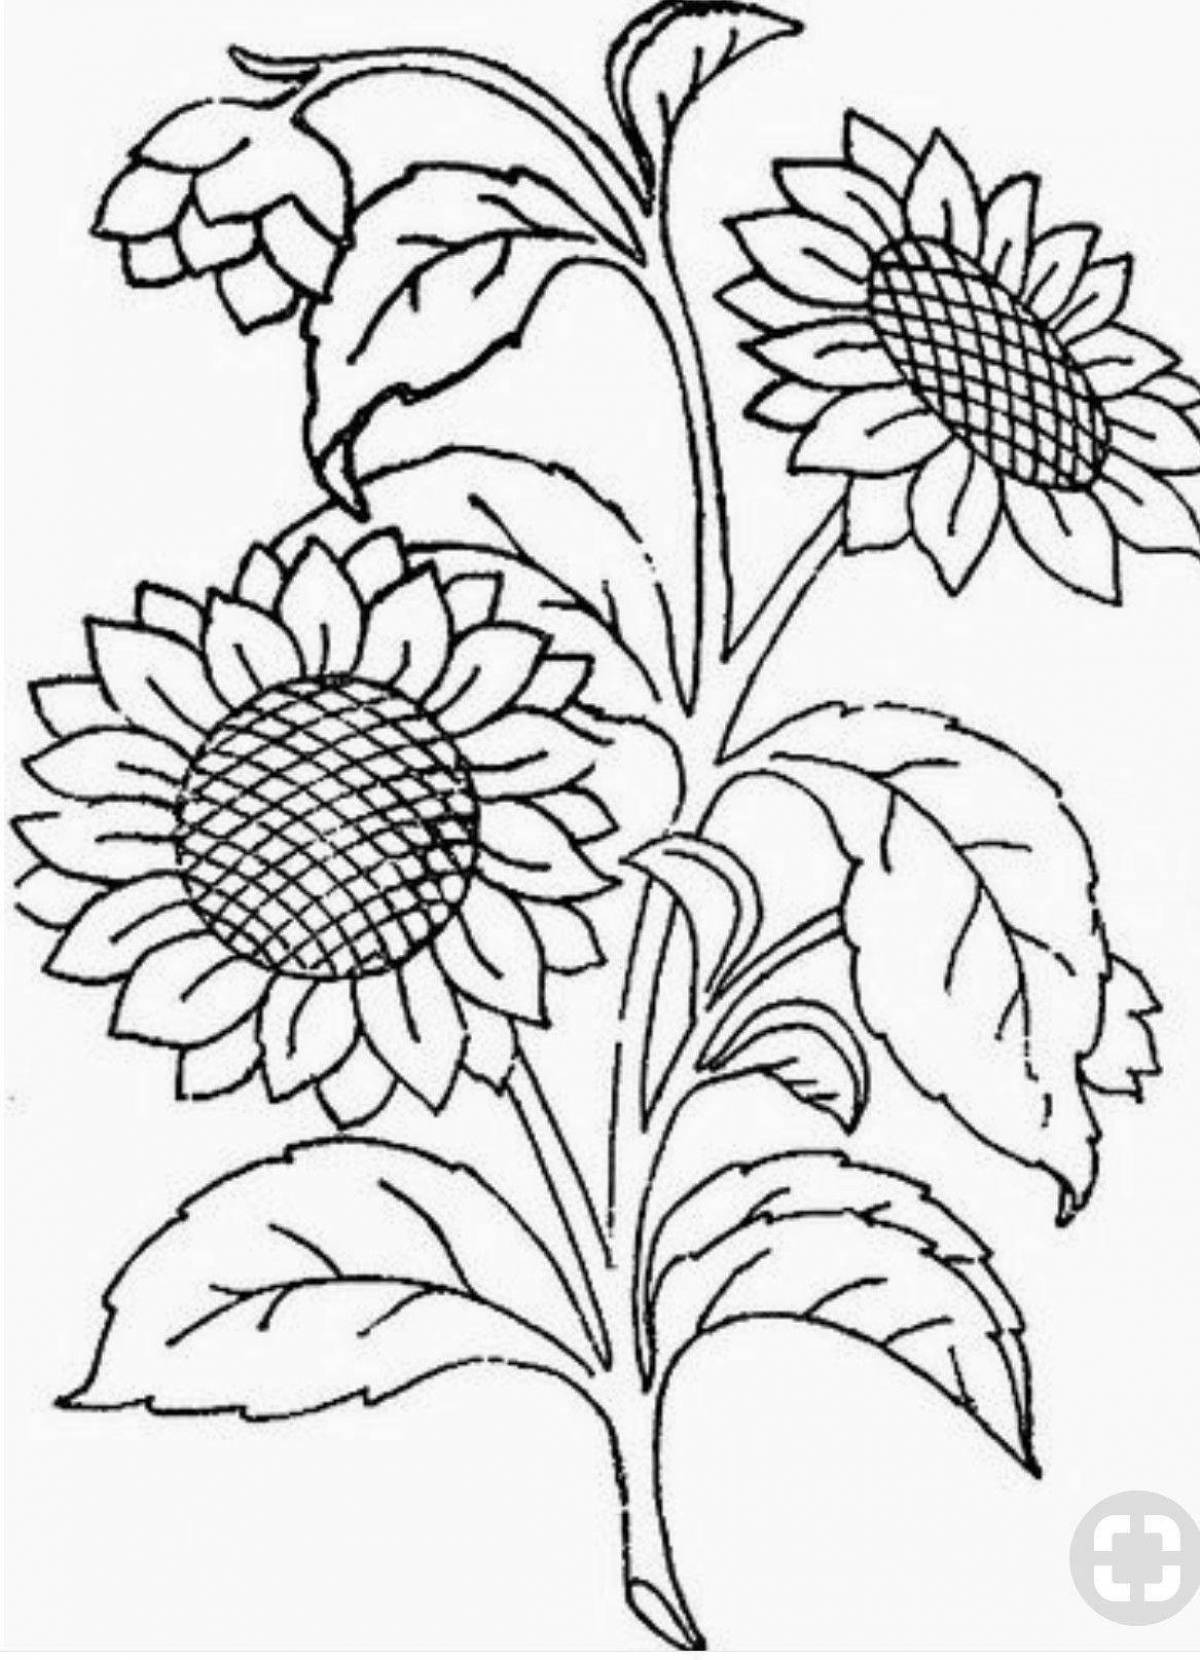 Garden flowers coloring page